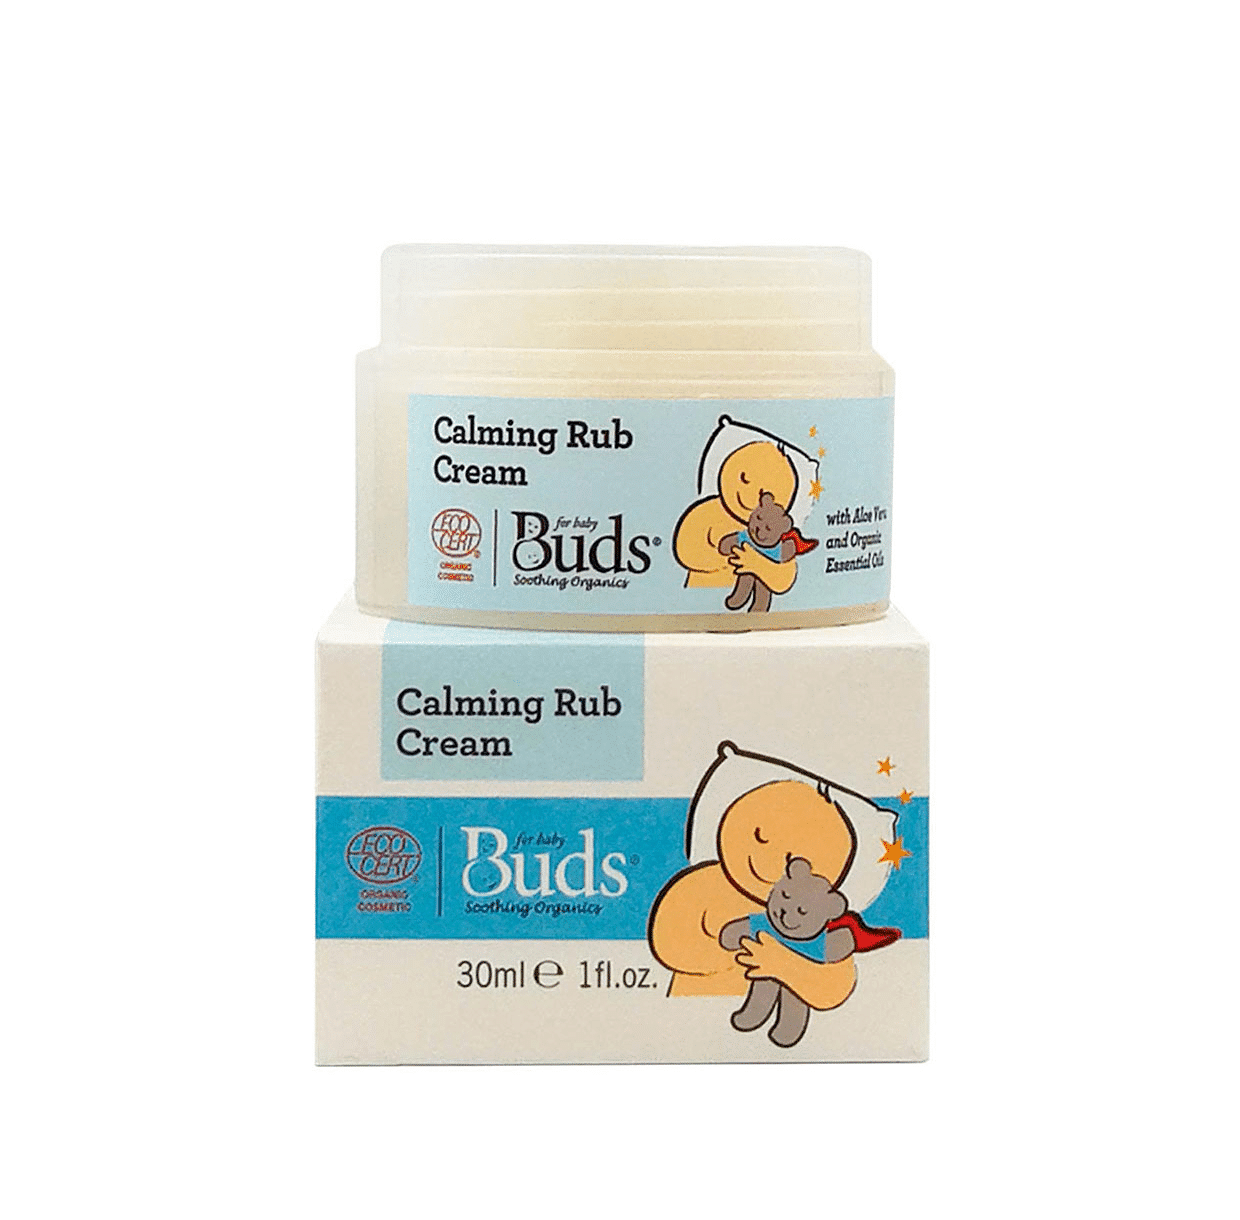 Which brand is best for baby products?